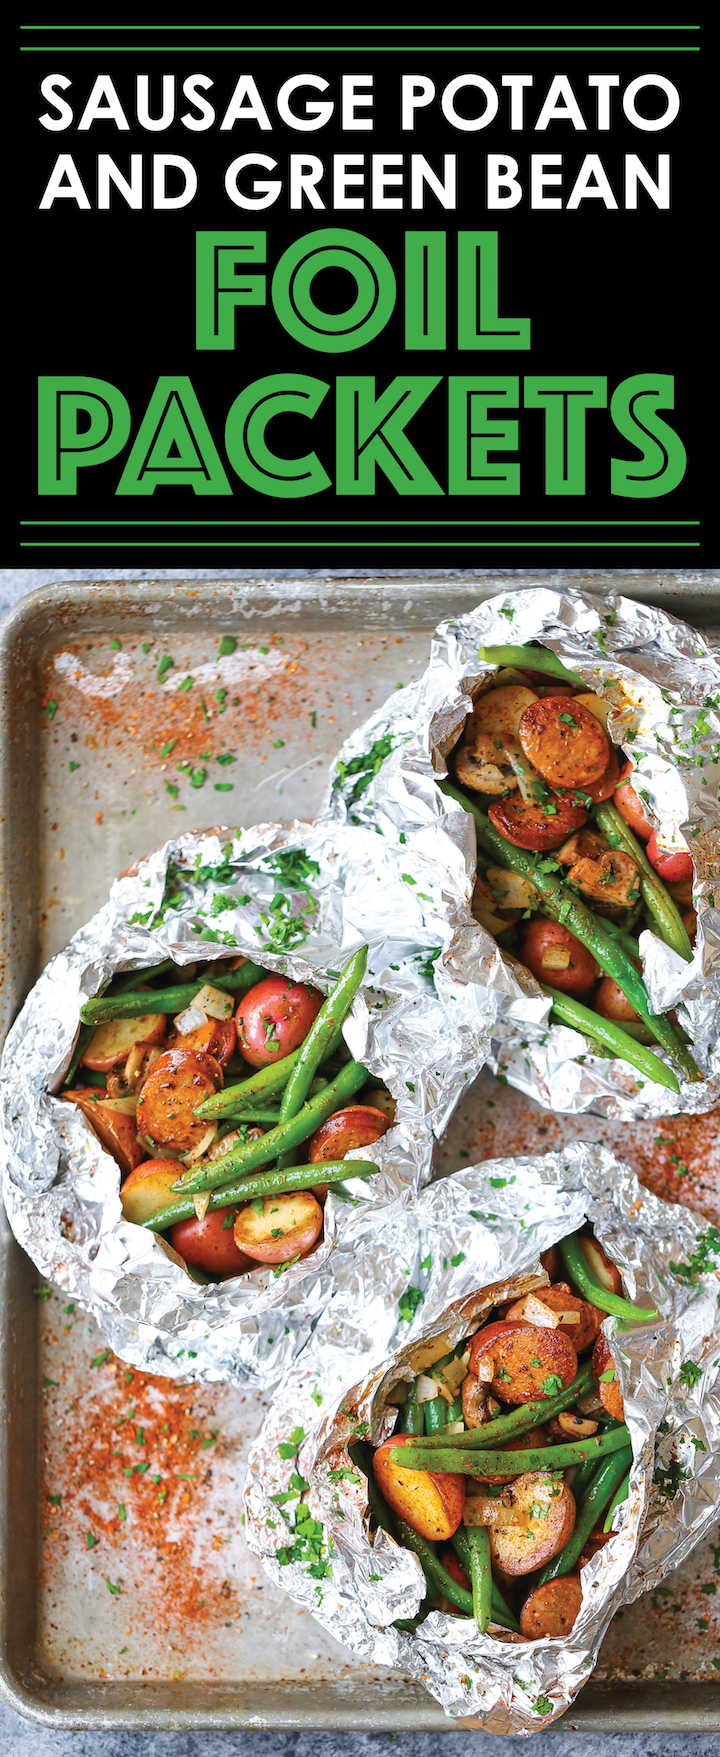 Sausage, Potato and Green Bean Foil Packets - Sausage and veggies packed in easy foil packets. Perfect for camping or a quick dinner! Can be baked/grilled.